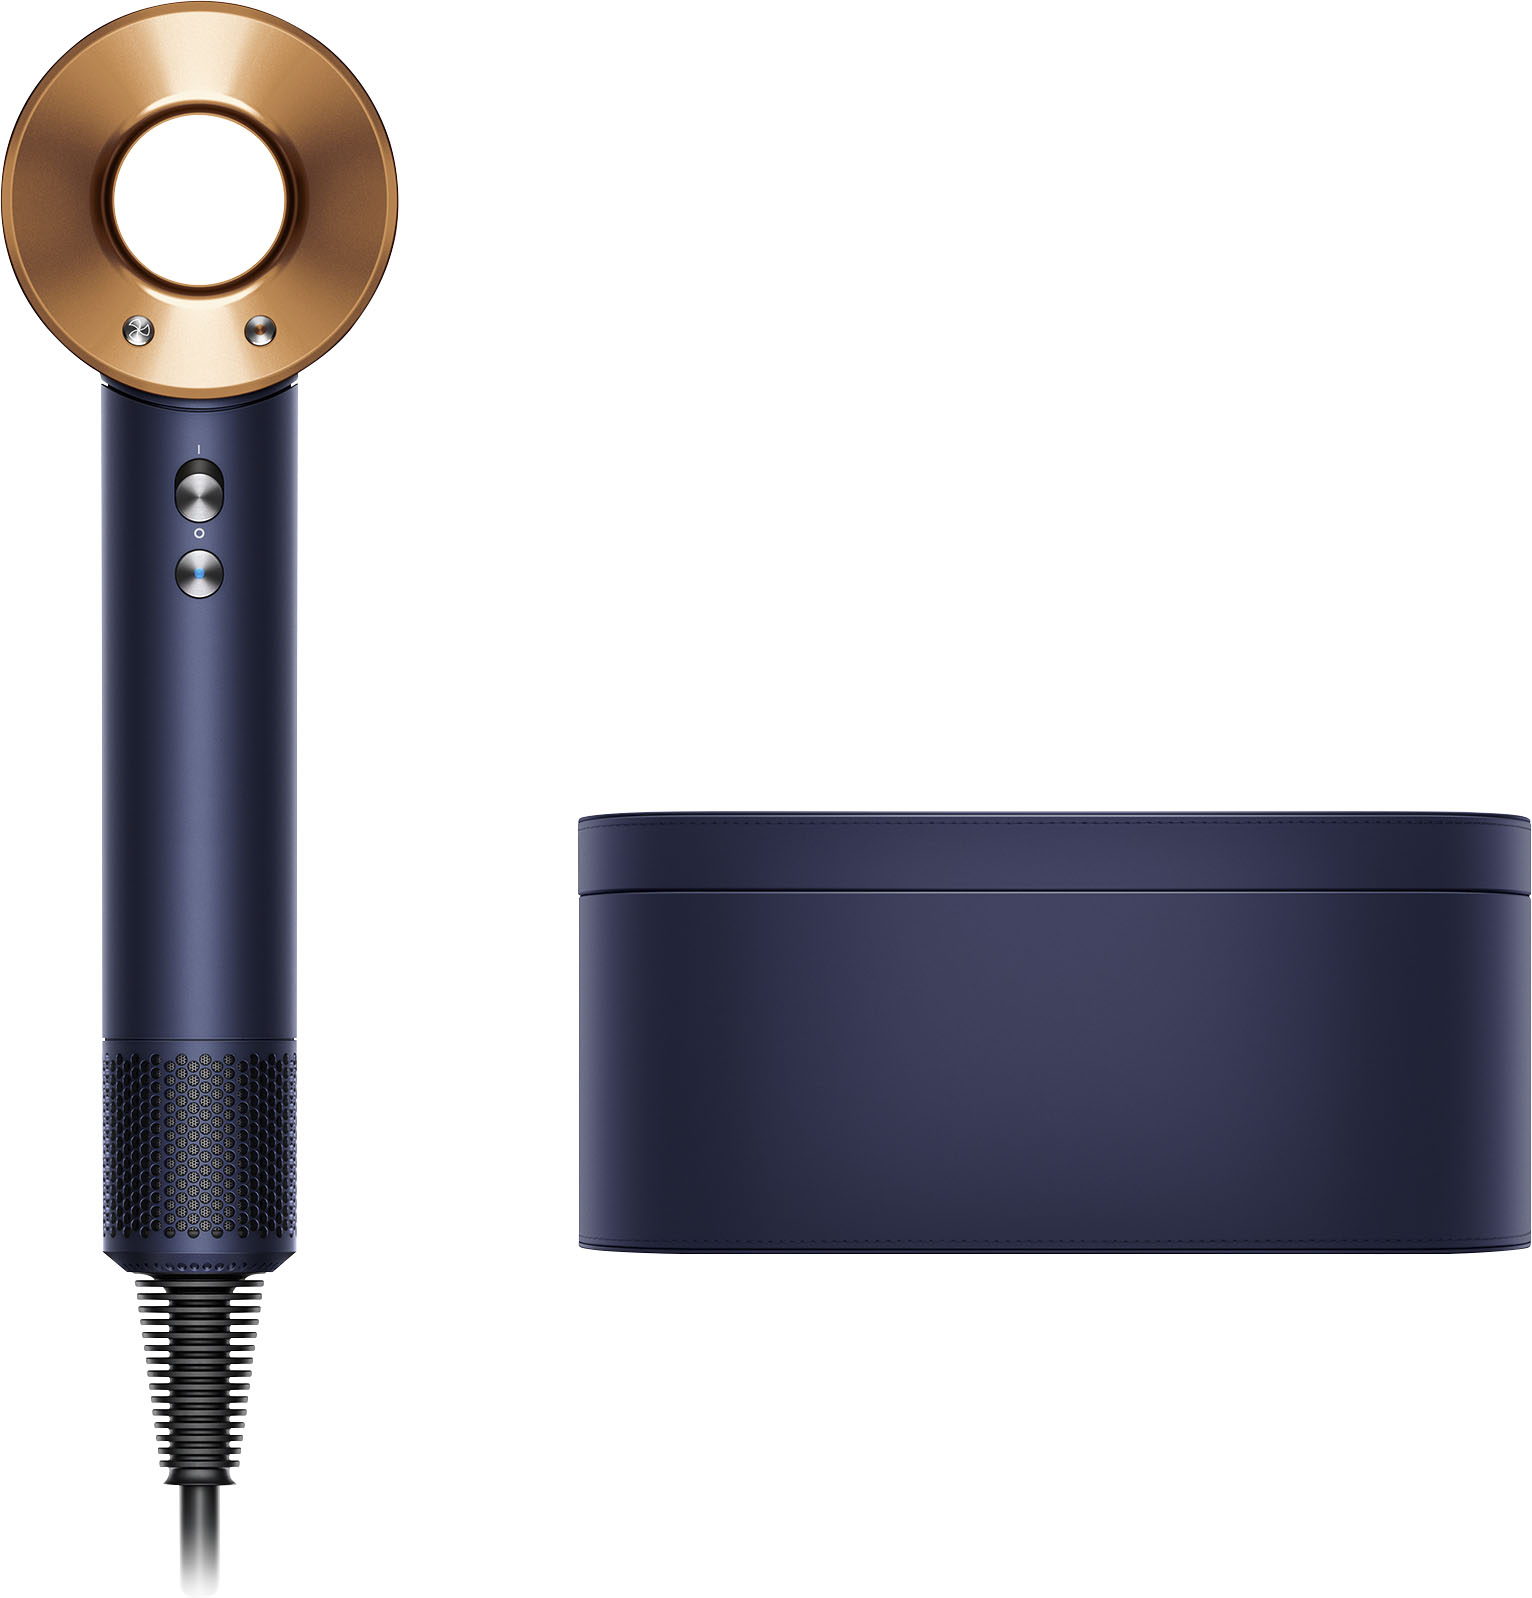 valg område dok New special edition Dyson Supersonic hair dryer Prussian blue/rich copper  372362-01 - Best Buy